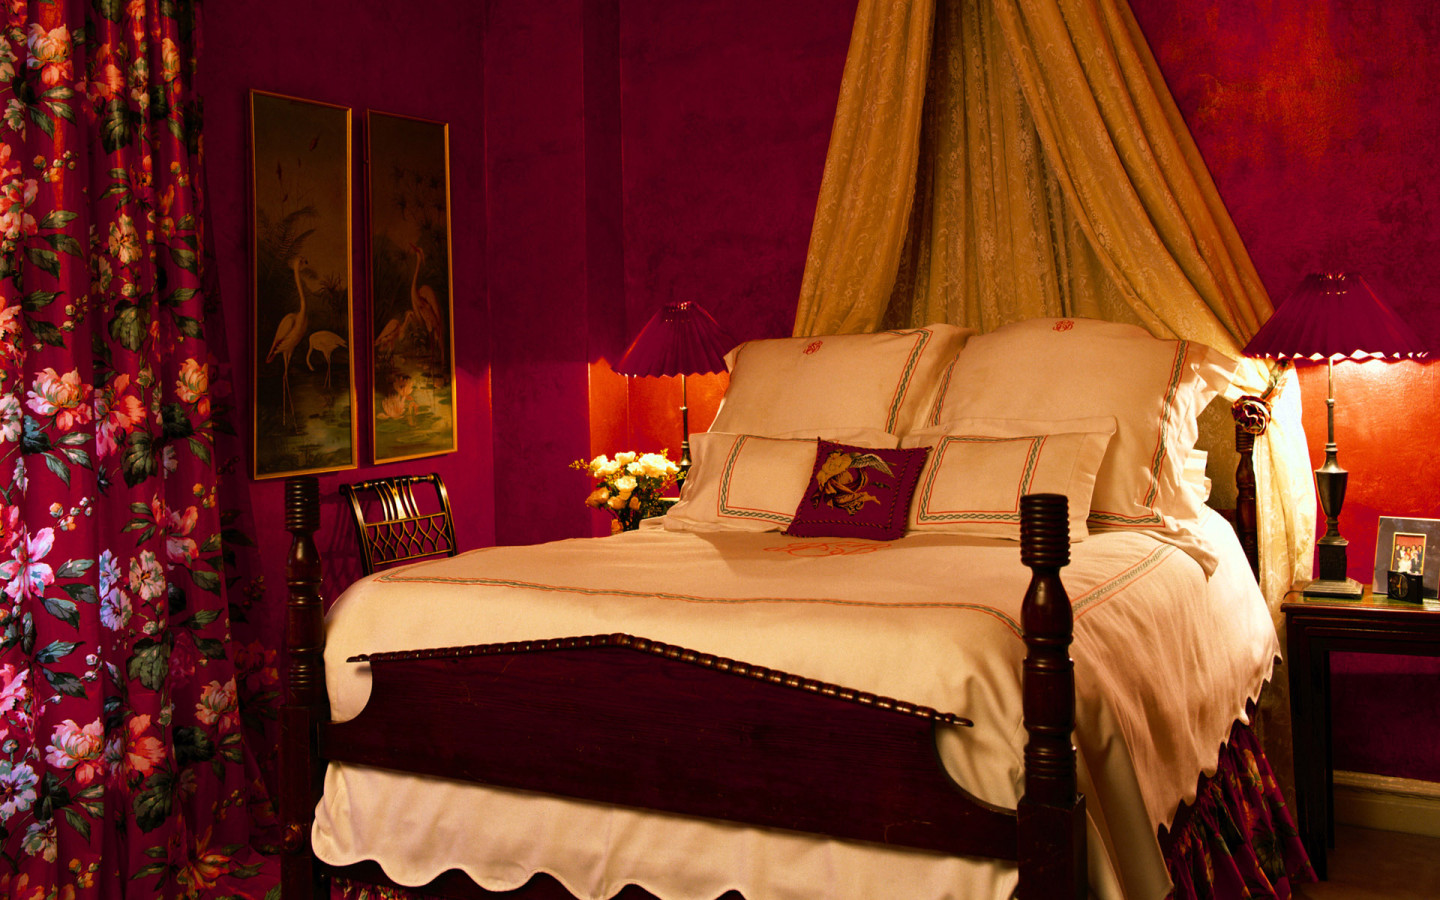 http://www.zastavki.com/pictures/1440x900/2009/Interior_A_bedroom_in_shades_of_red_016909_.jpg